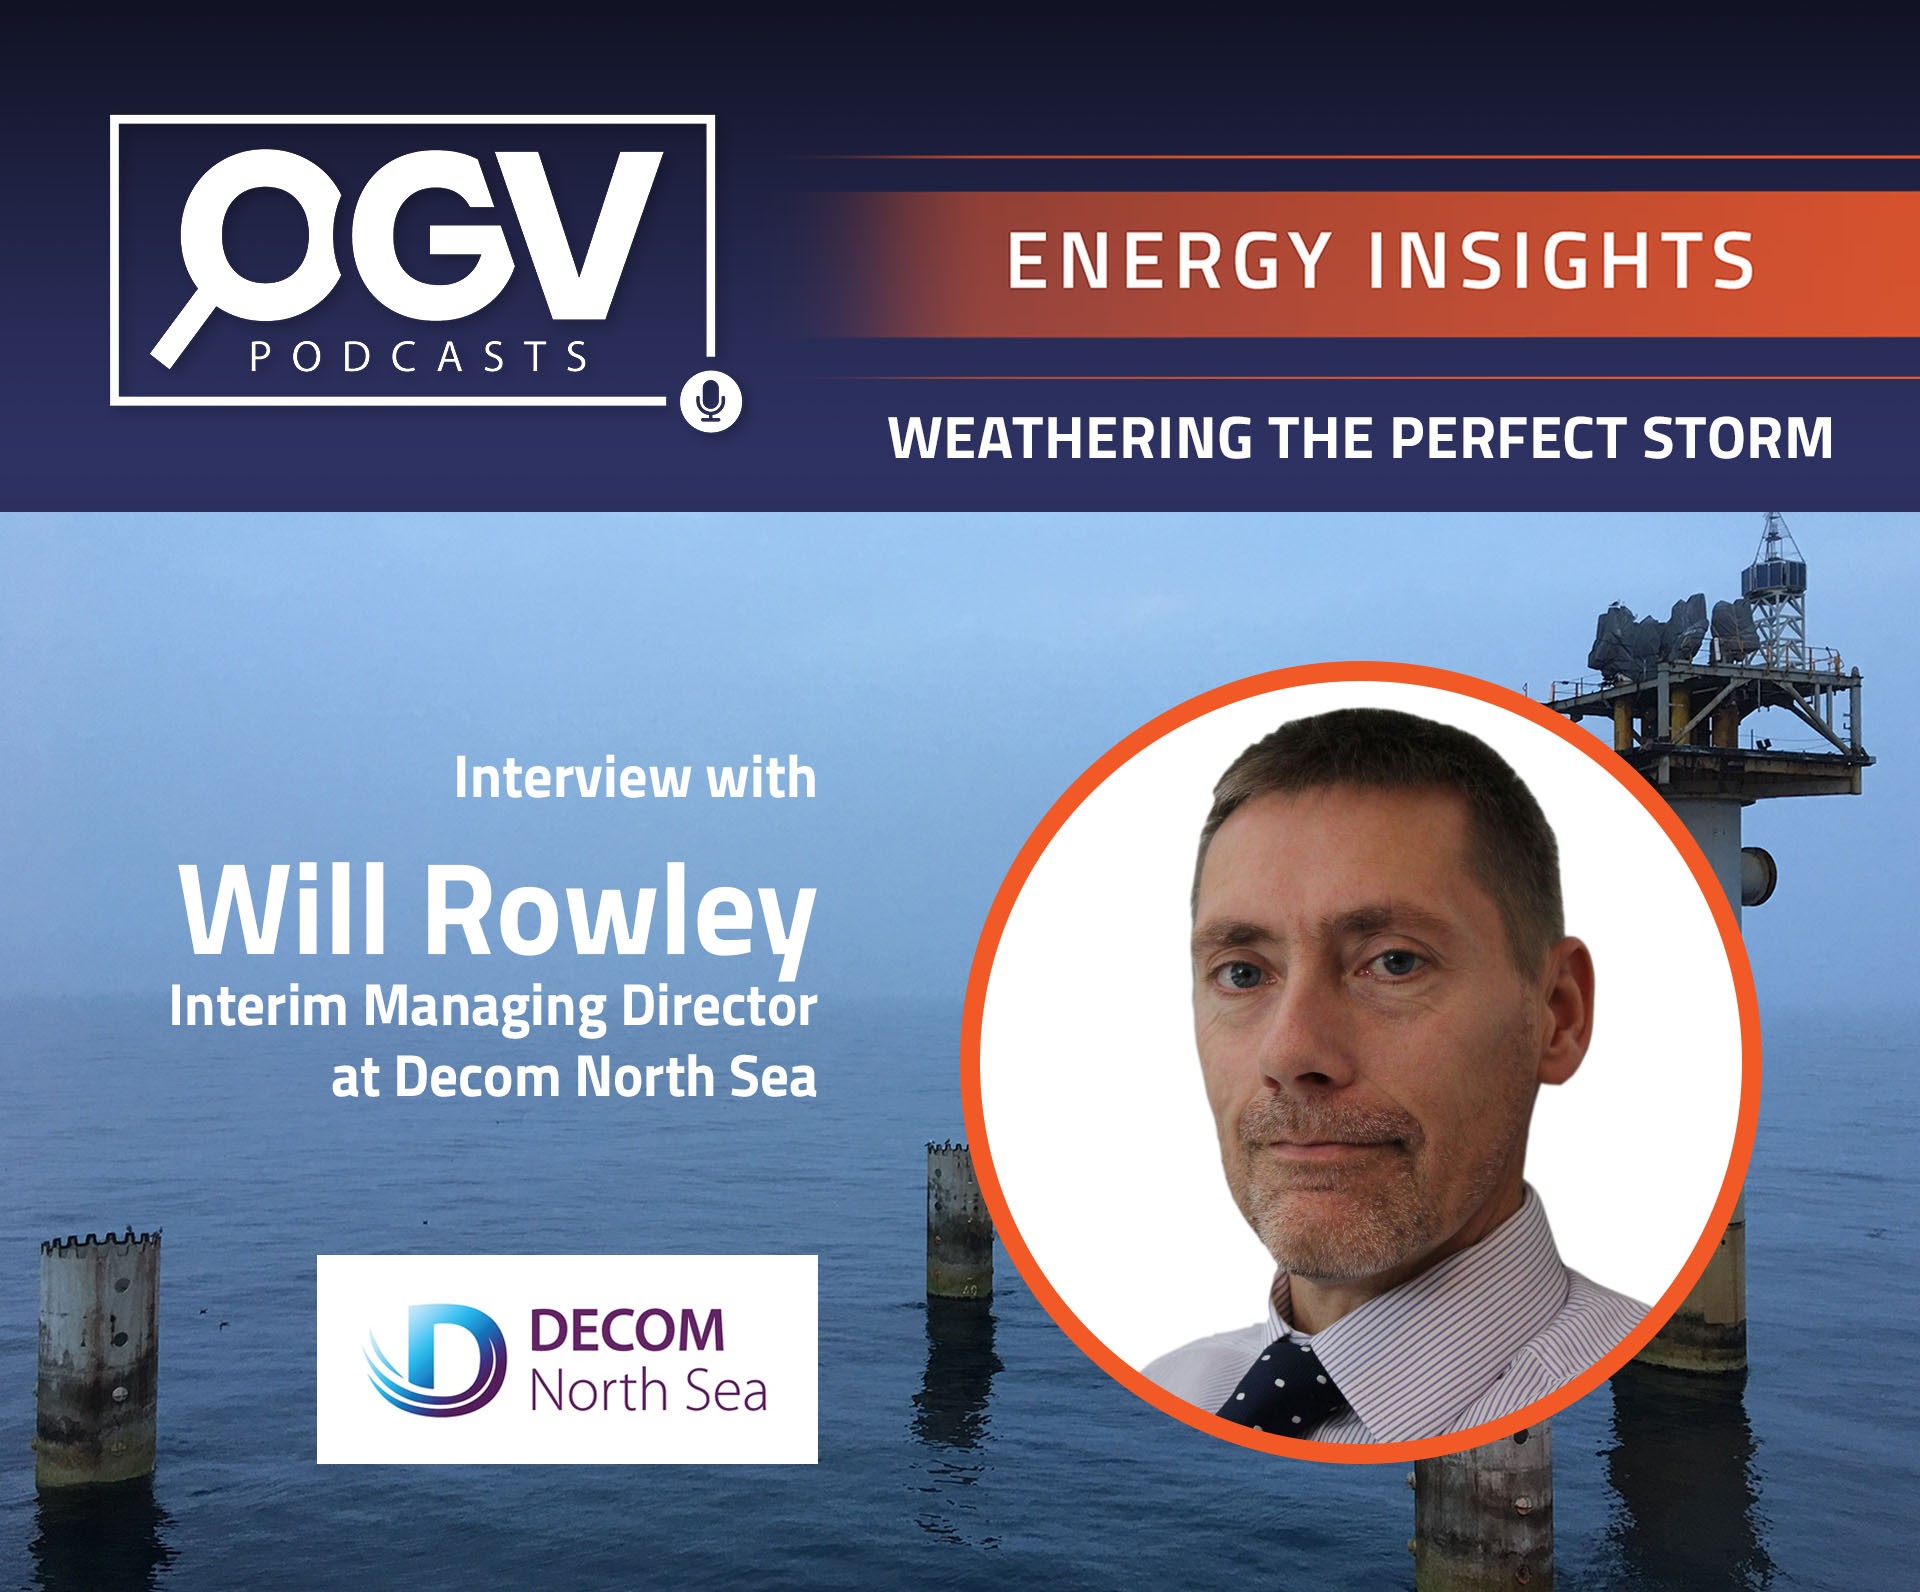 "The Decommissioning Conundrum" with Will Rowley, Interim Managing Director at Decom North Sea